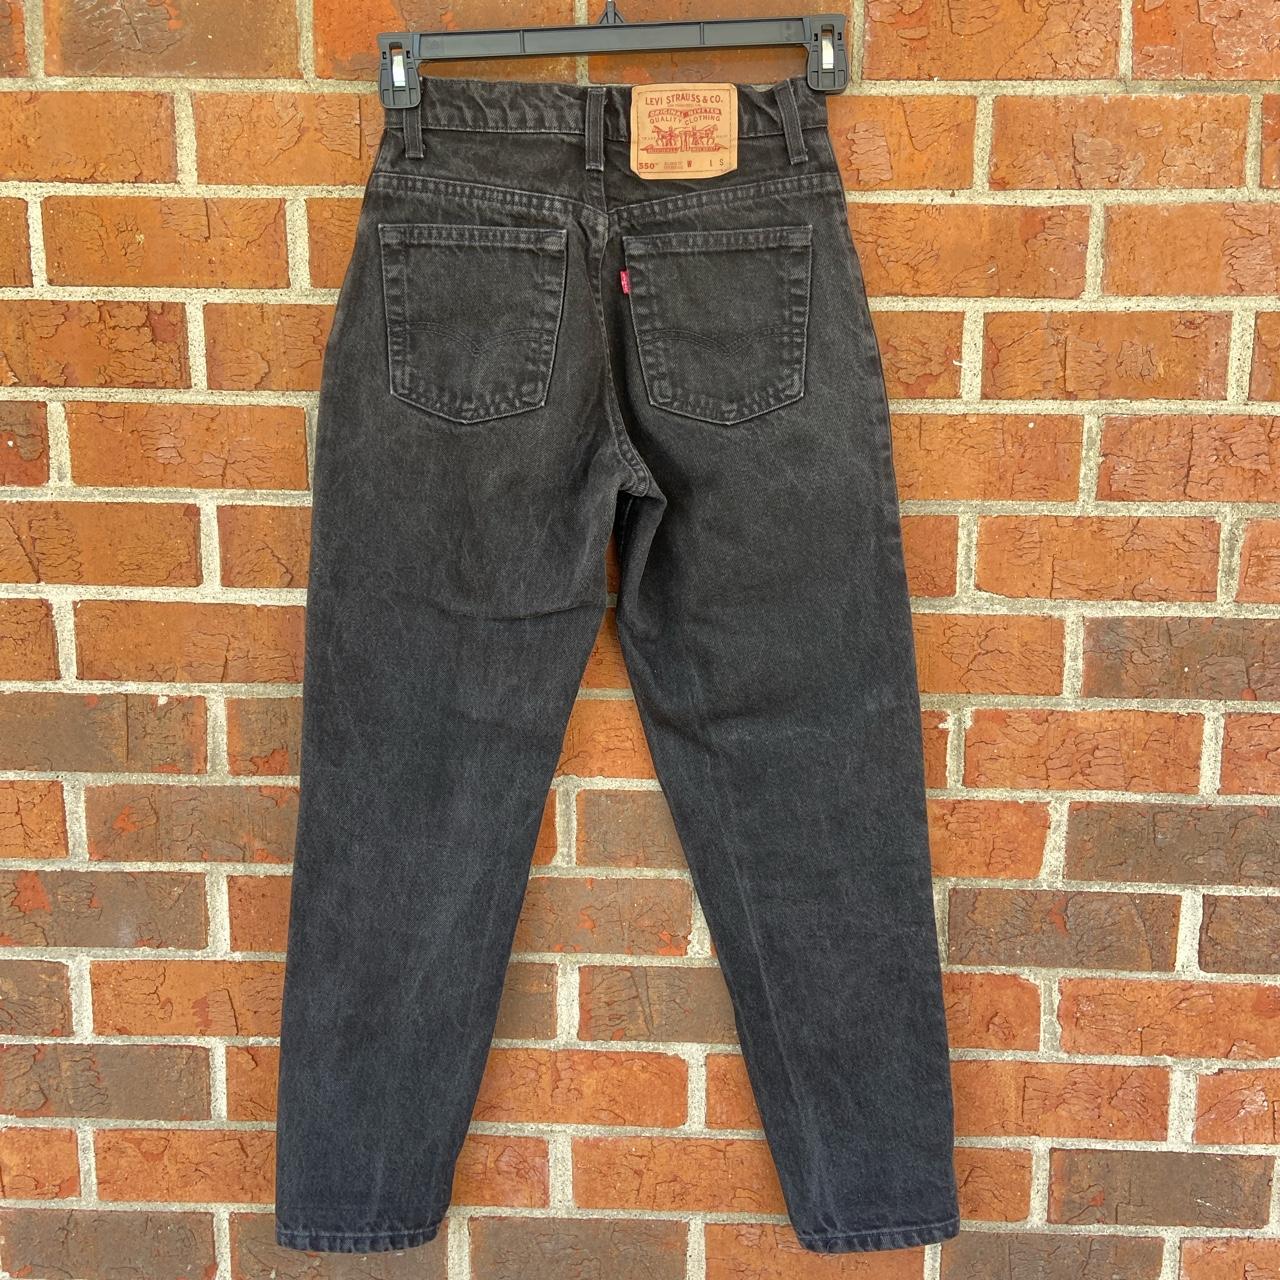 Vintage 1994 black Levis 550 jeans made in the USA....